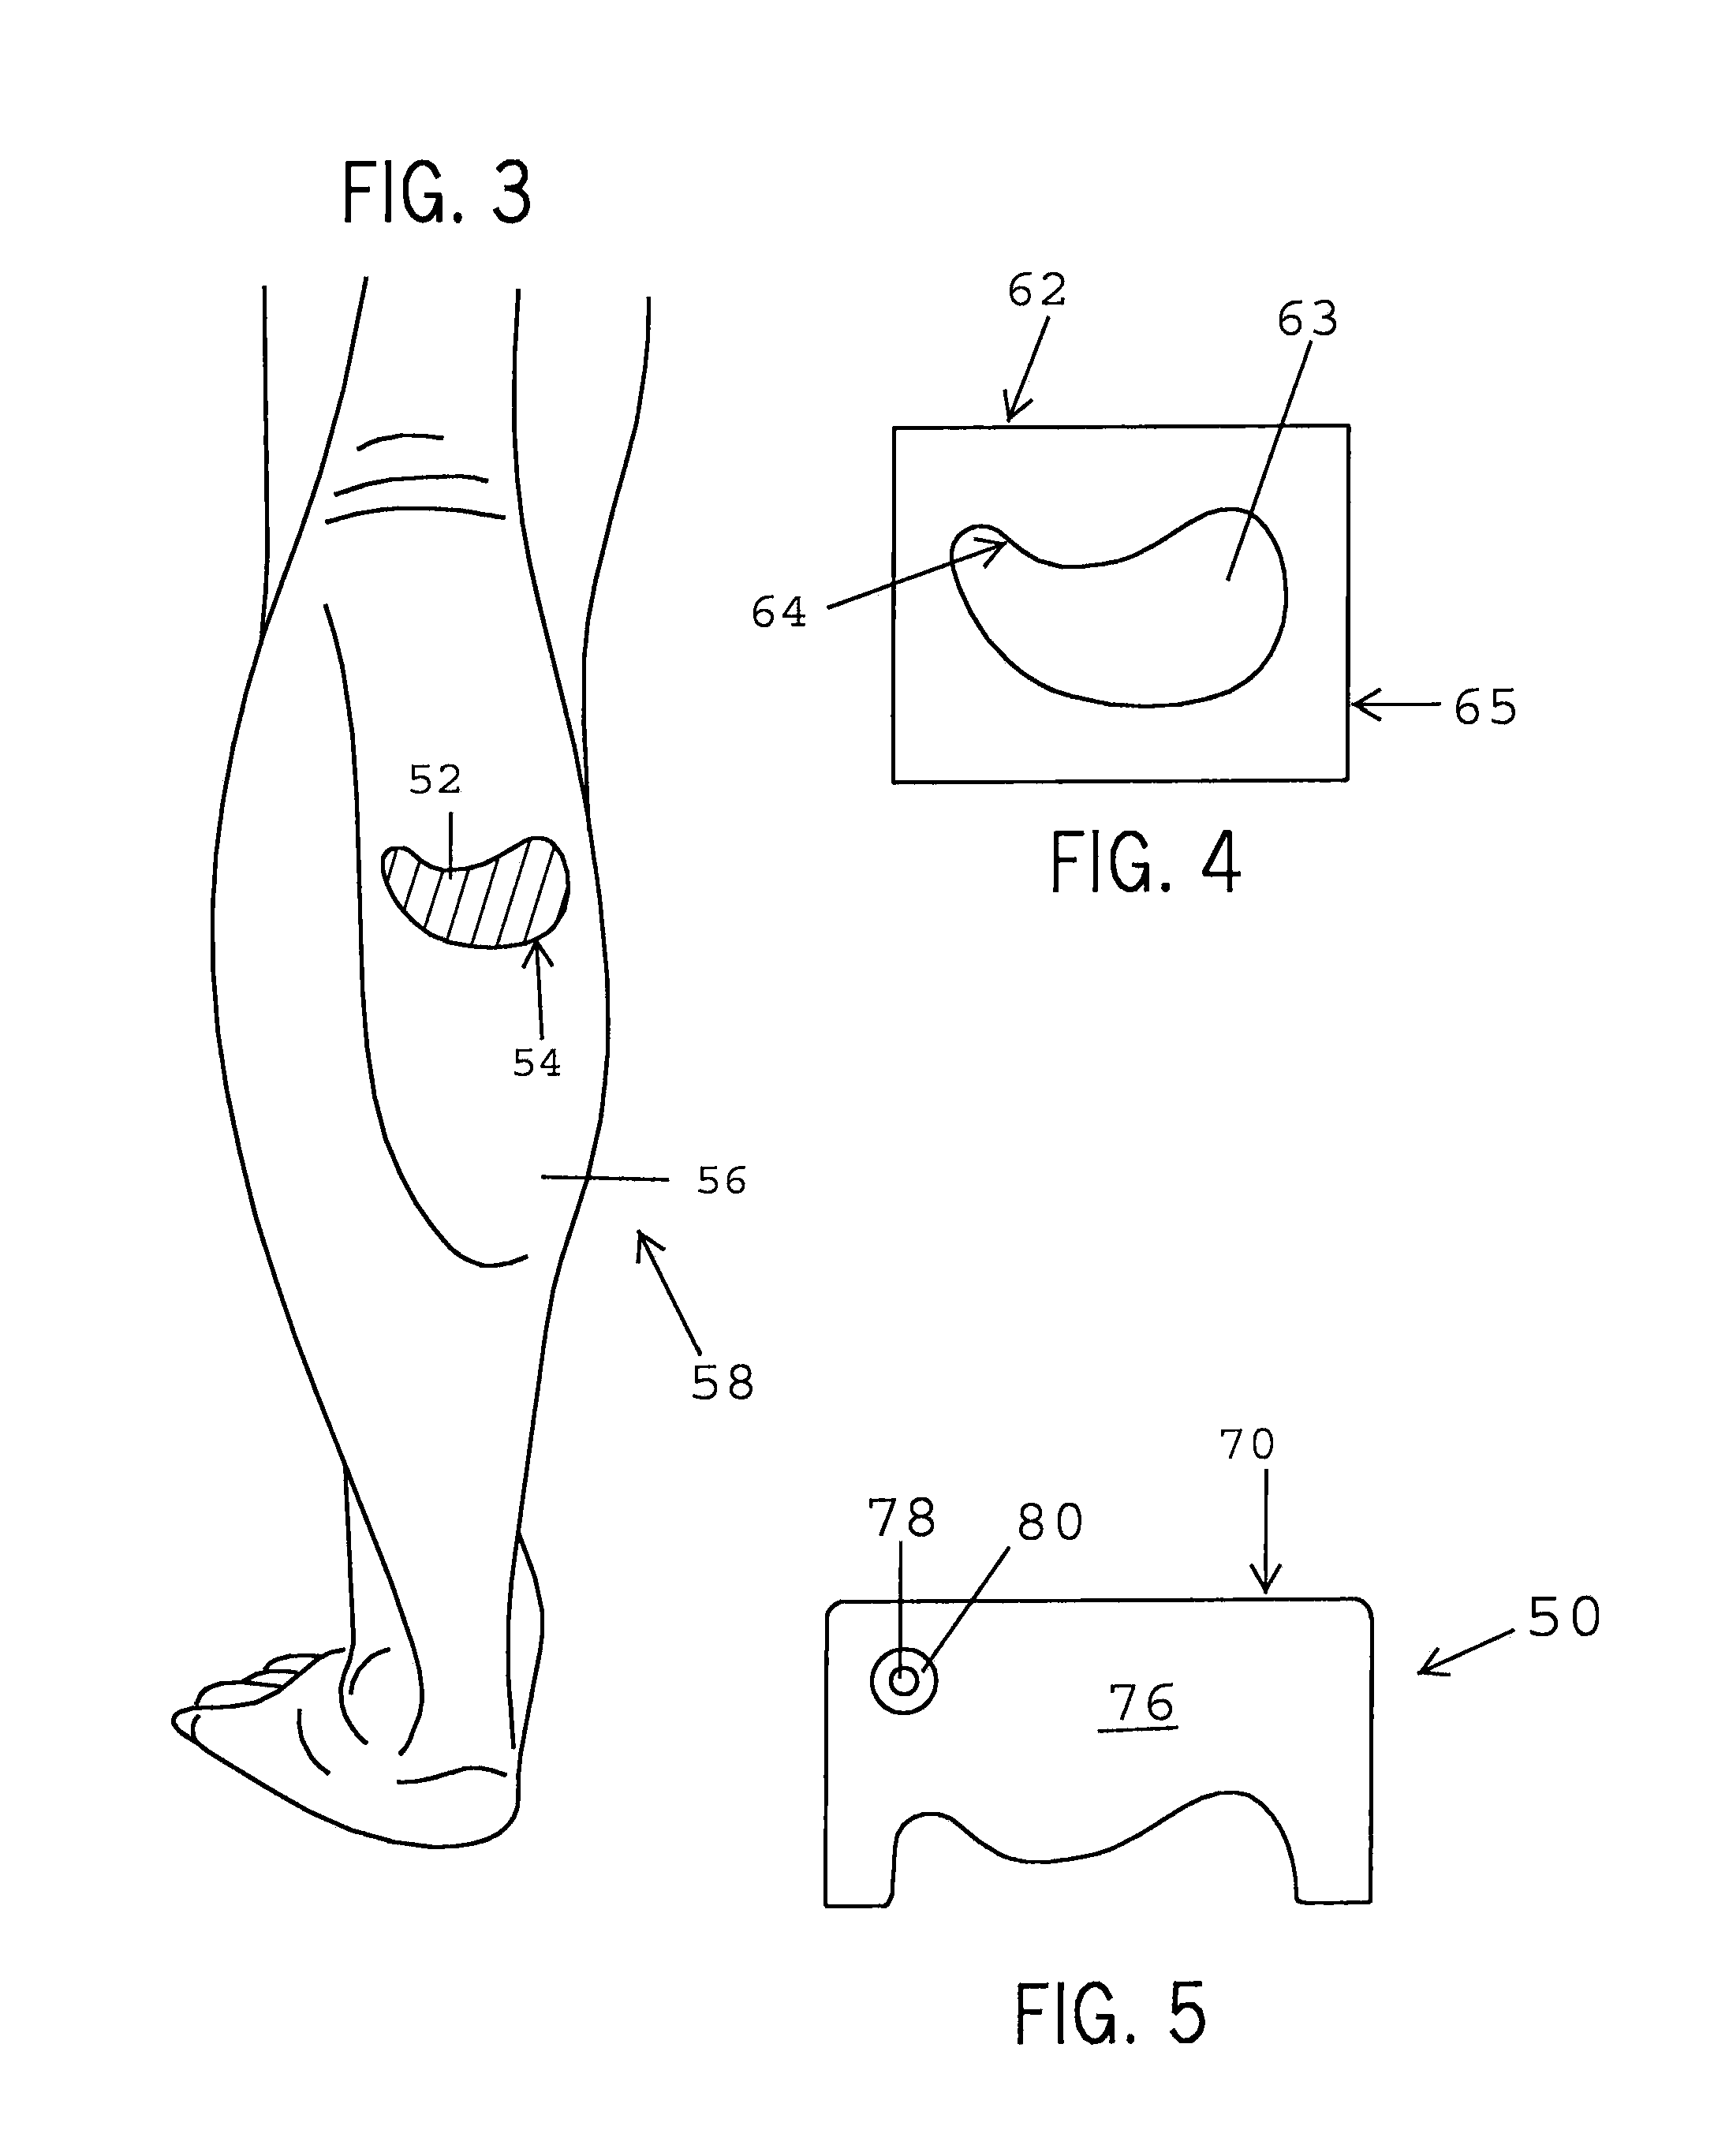 Devices and methods for manipulating circulation in the circulatory system of a patient